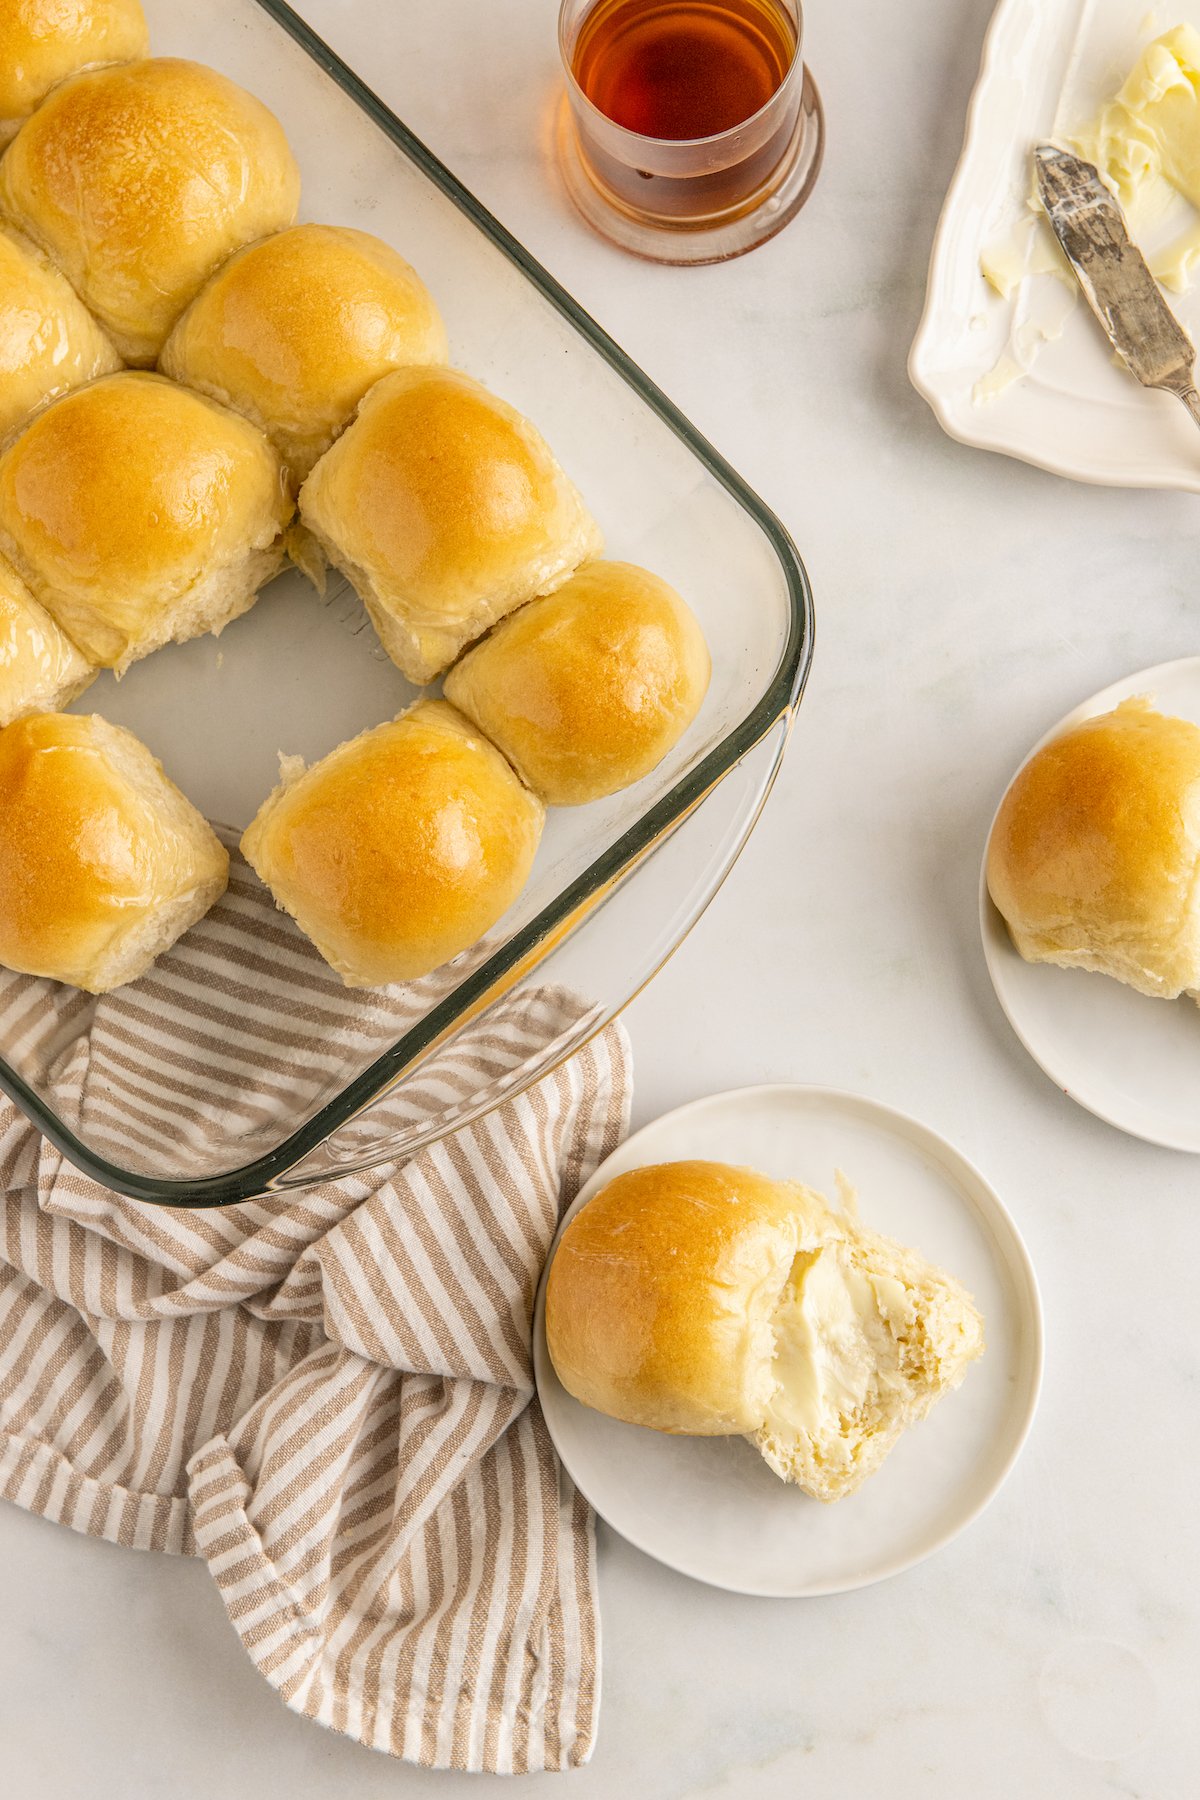 Overhead shot of a baking dish of rolls, with two rolls served onto small plates. A dish of butter and a dish of jelly sit nearby on the table.